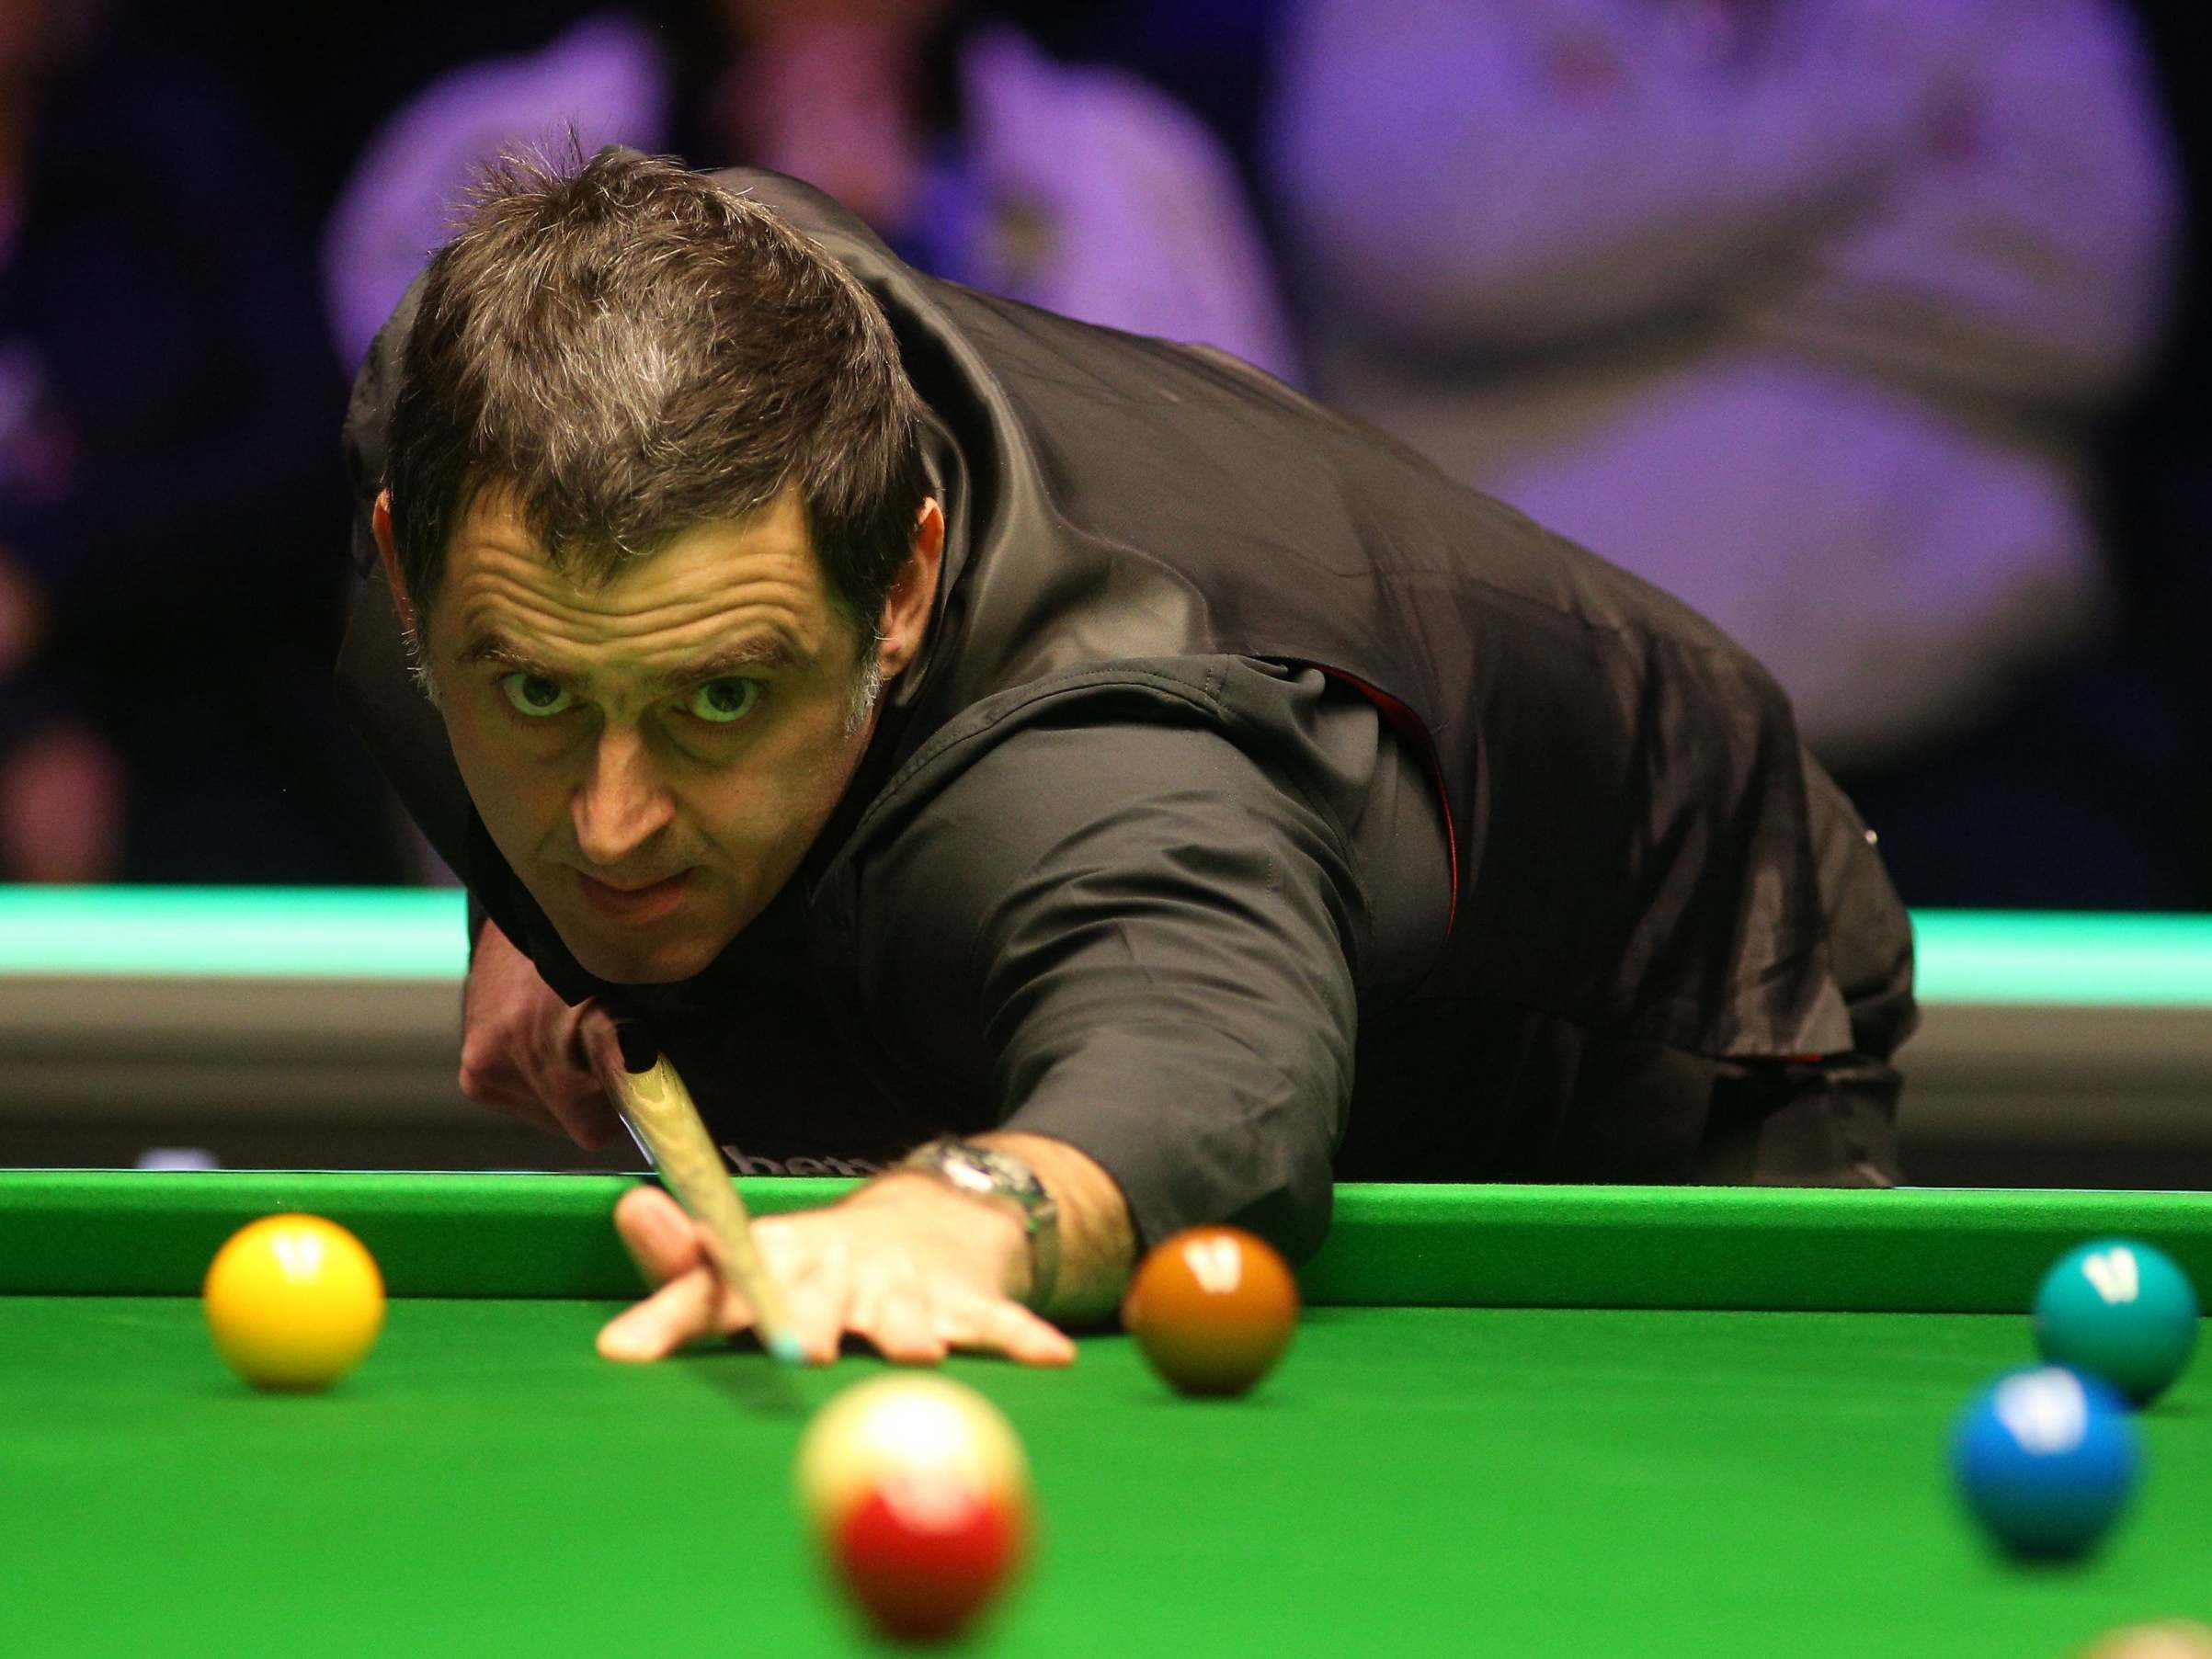 World Snooker Championship 2020 final Ronnie OSullivans erratic display opens door for Kyren Wilson The Independent The Independent